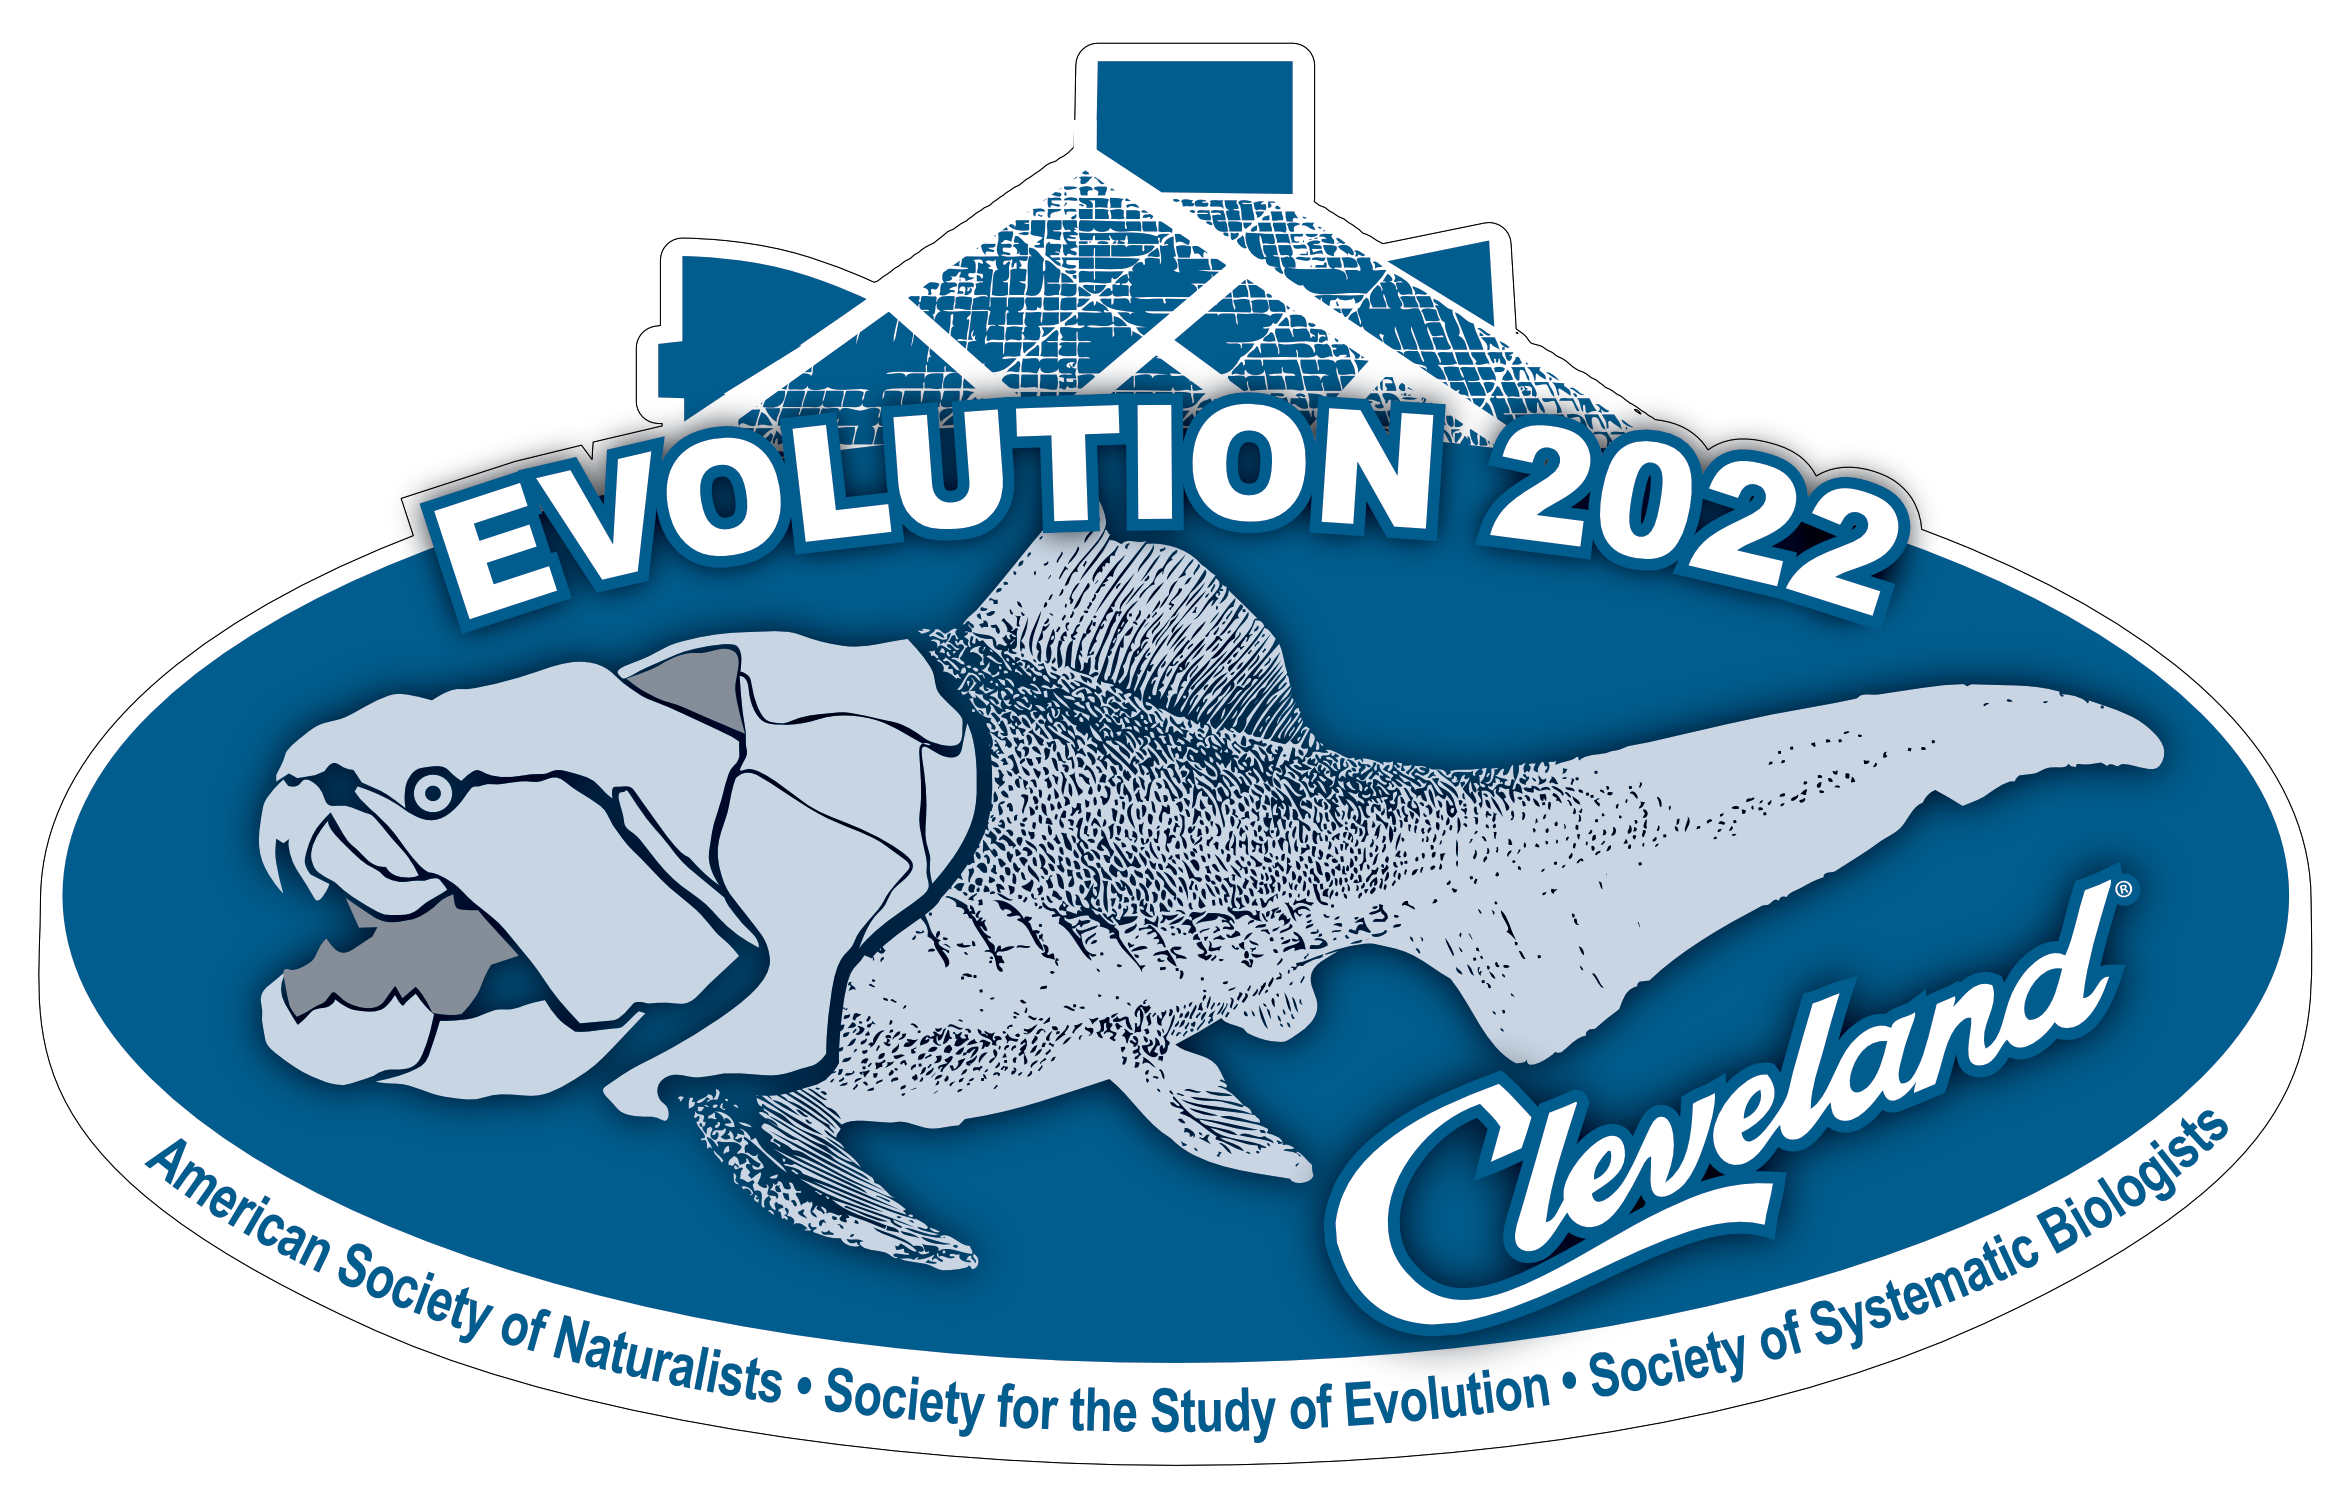 The Evolution 2022 logo: a fish fossil in gray on a blue background with the words Evolution 2022, Cleveland in white framing it it.